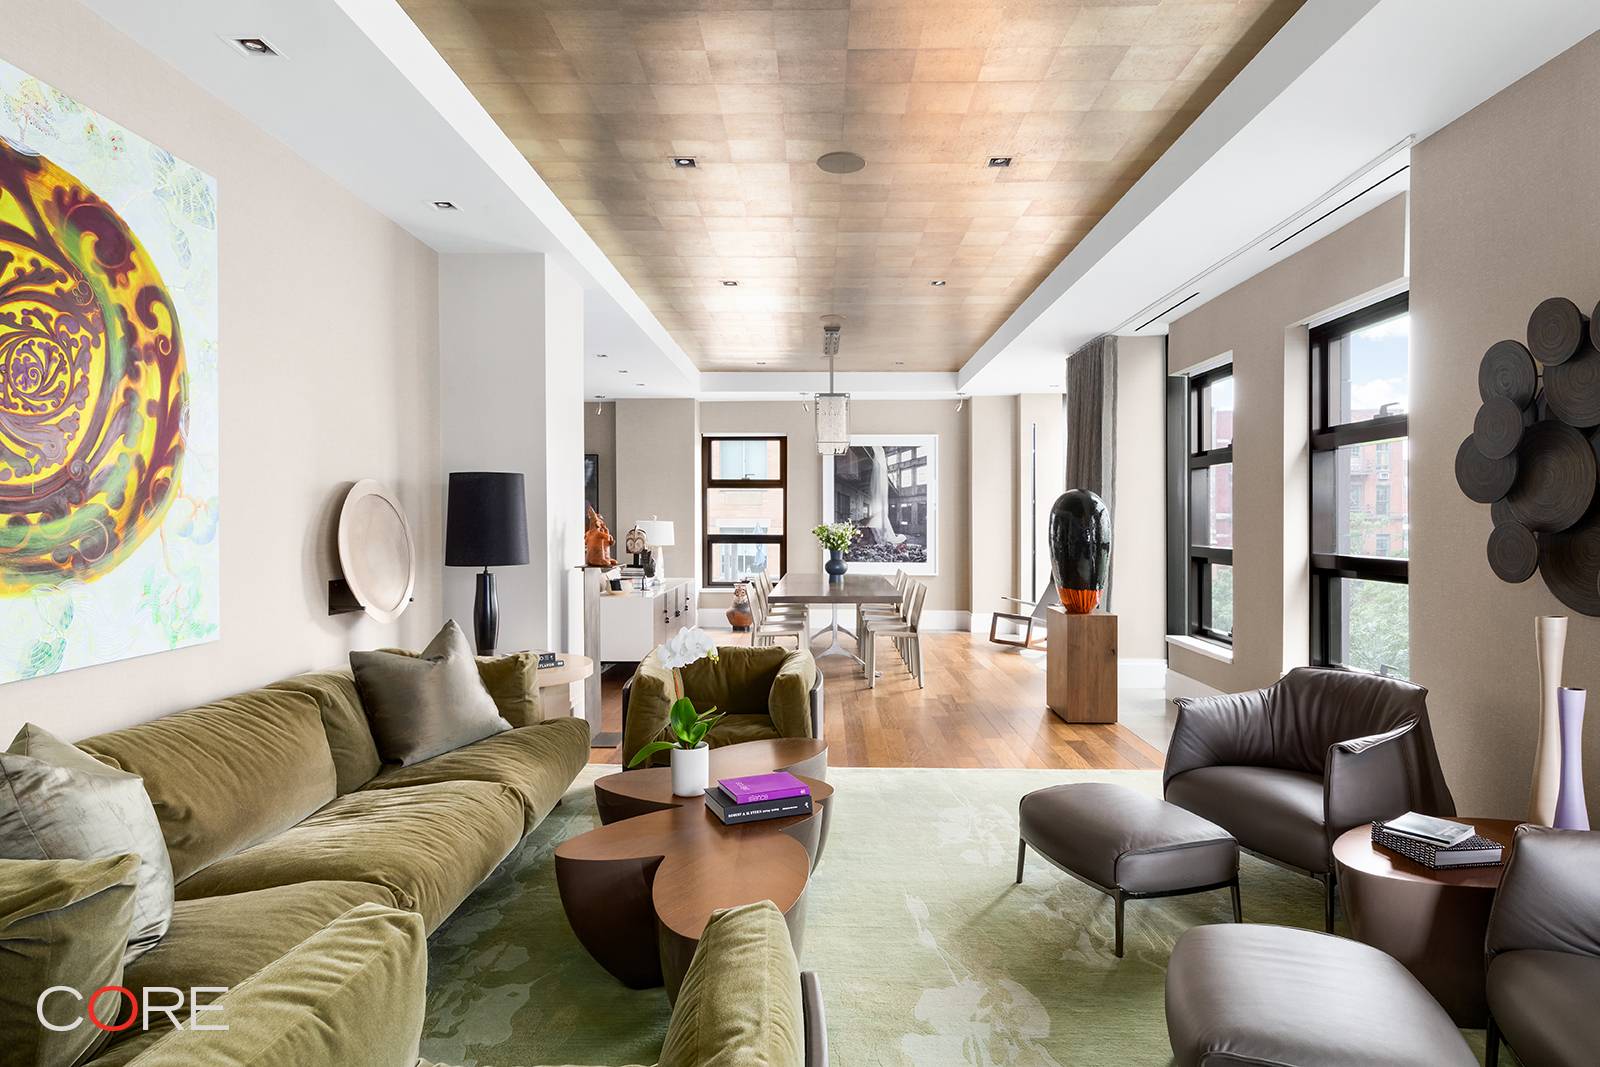 Residence 4E at 385 West 12th Street offers an exemplary West Village living experience on a cobblestoned, tree lined block with top of the line finishes and amenities to match.